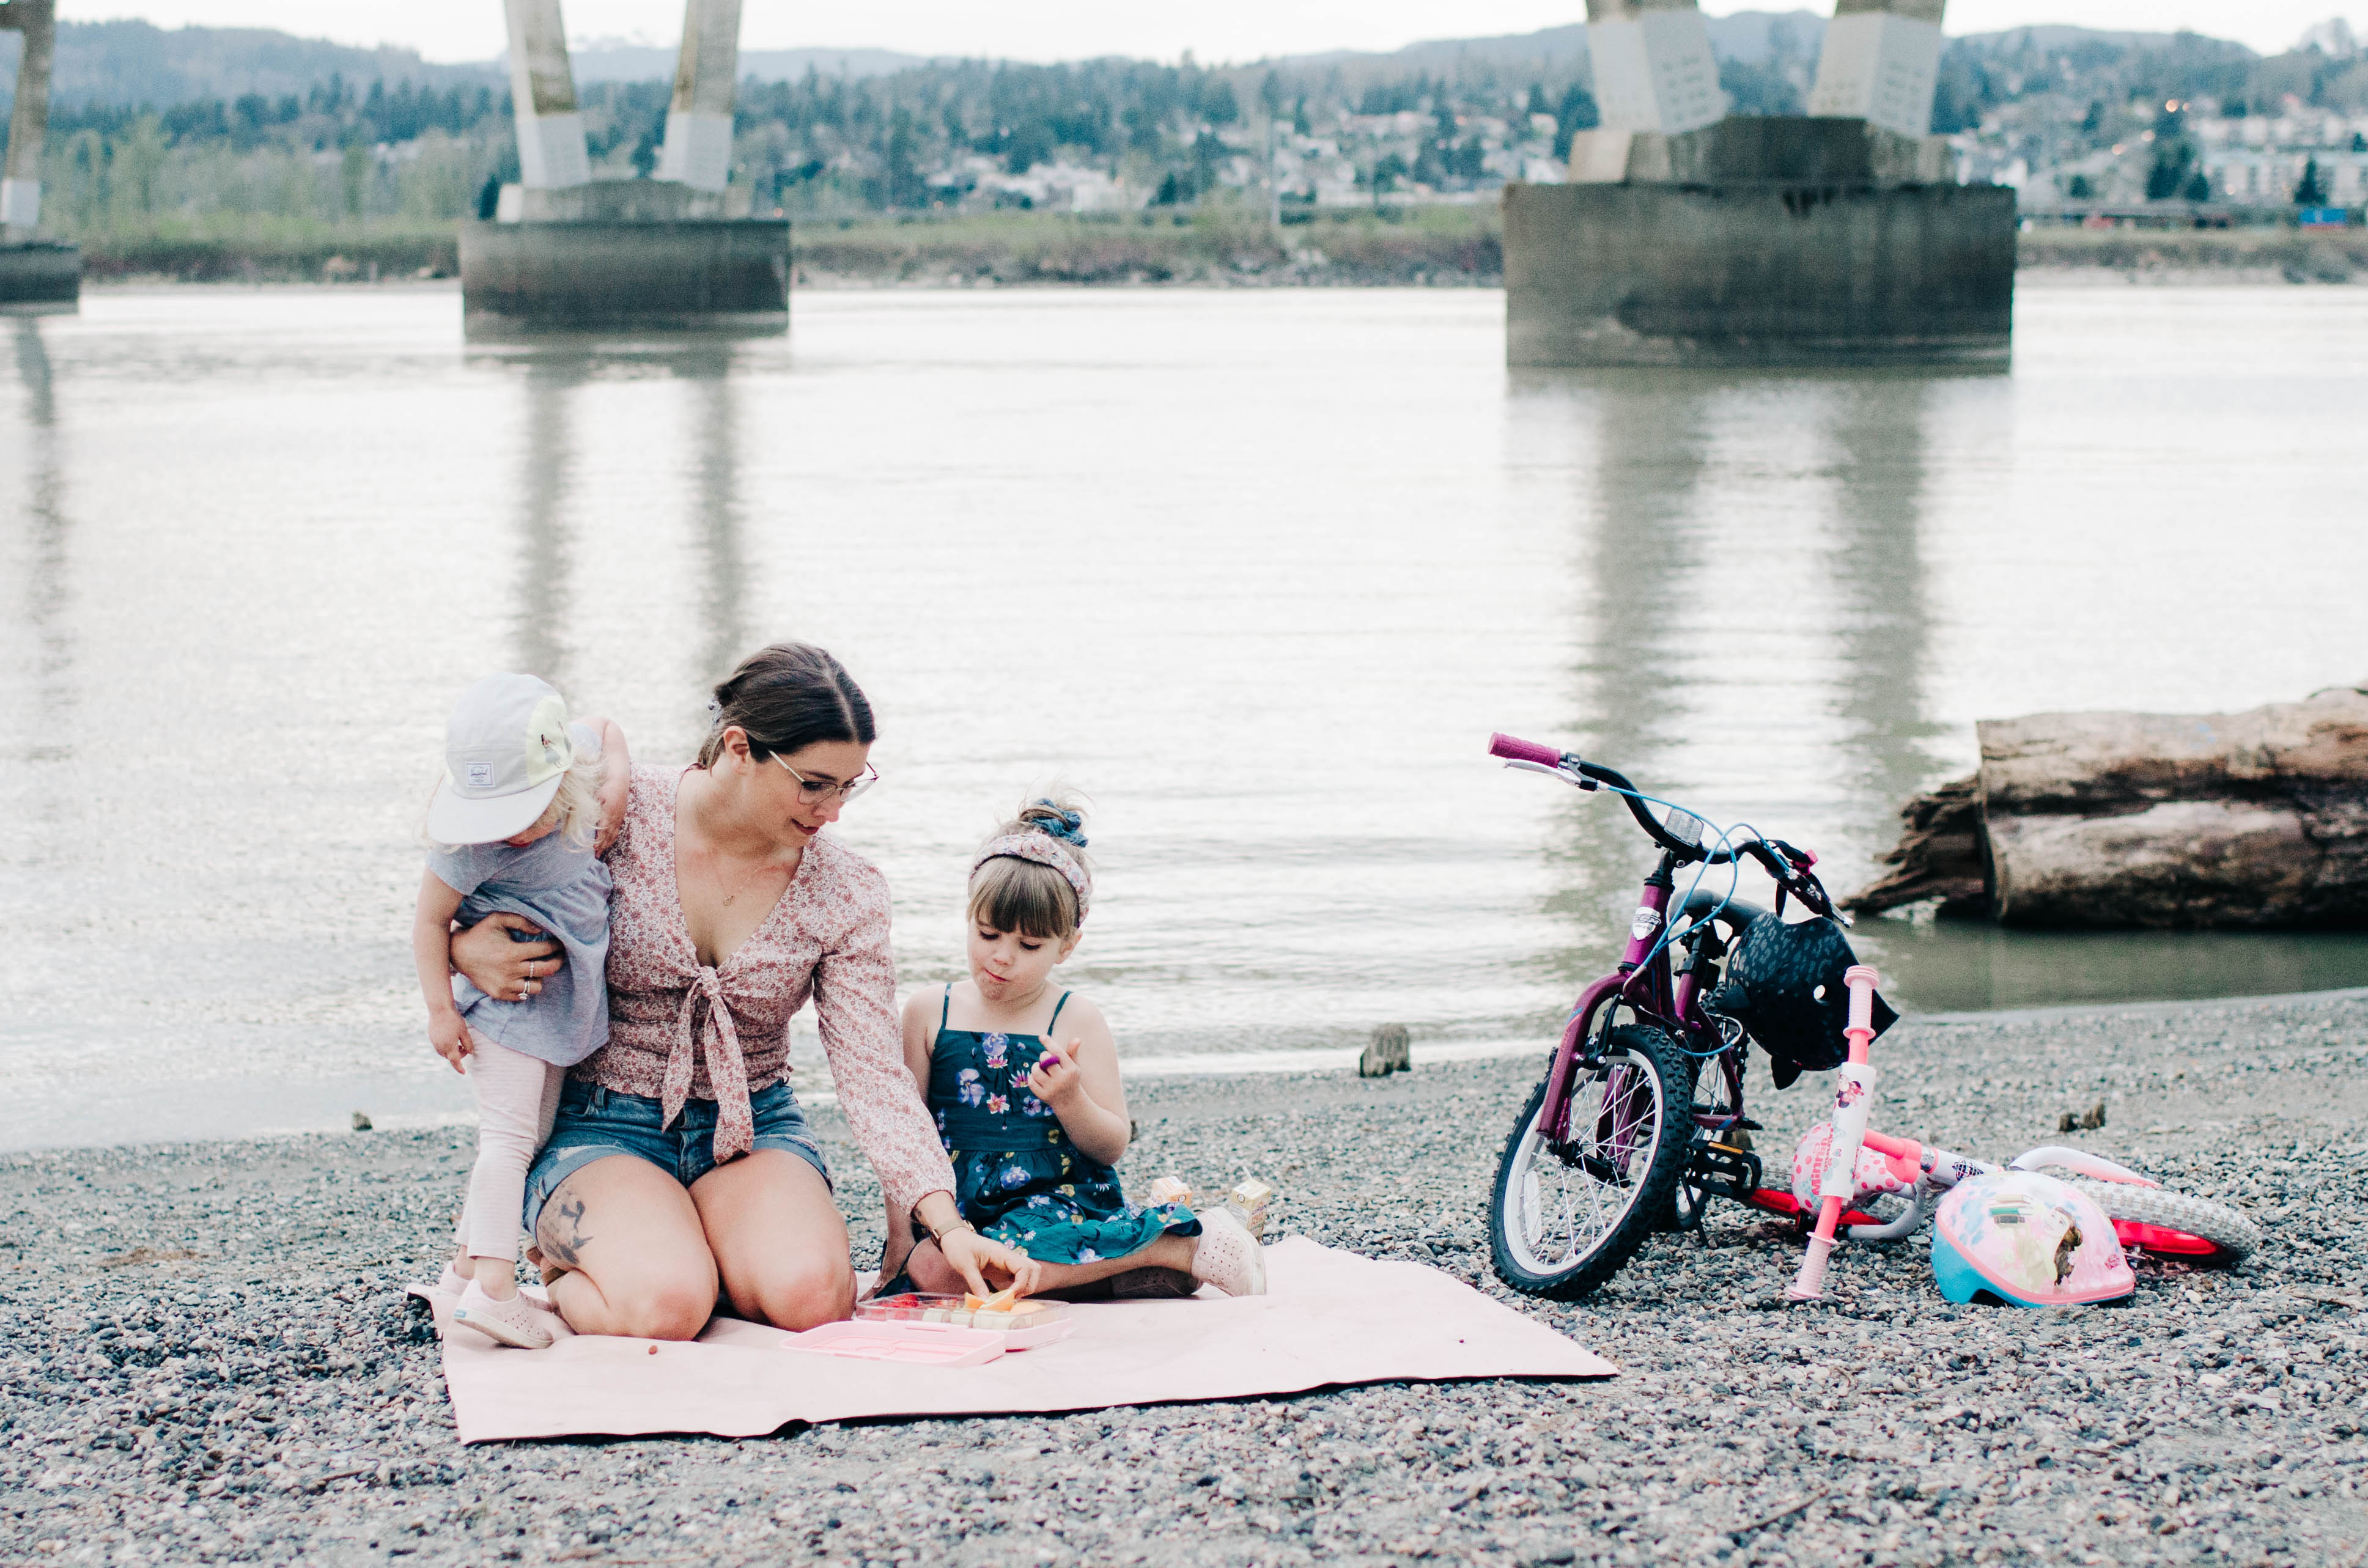 Codi Lynn with her two children on a blanket by the water eating fruit, with bikes nearby